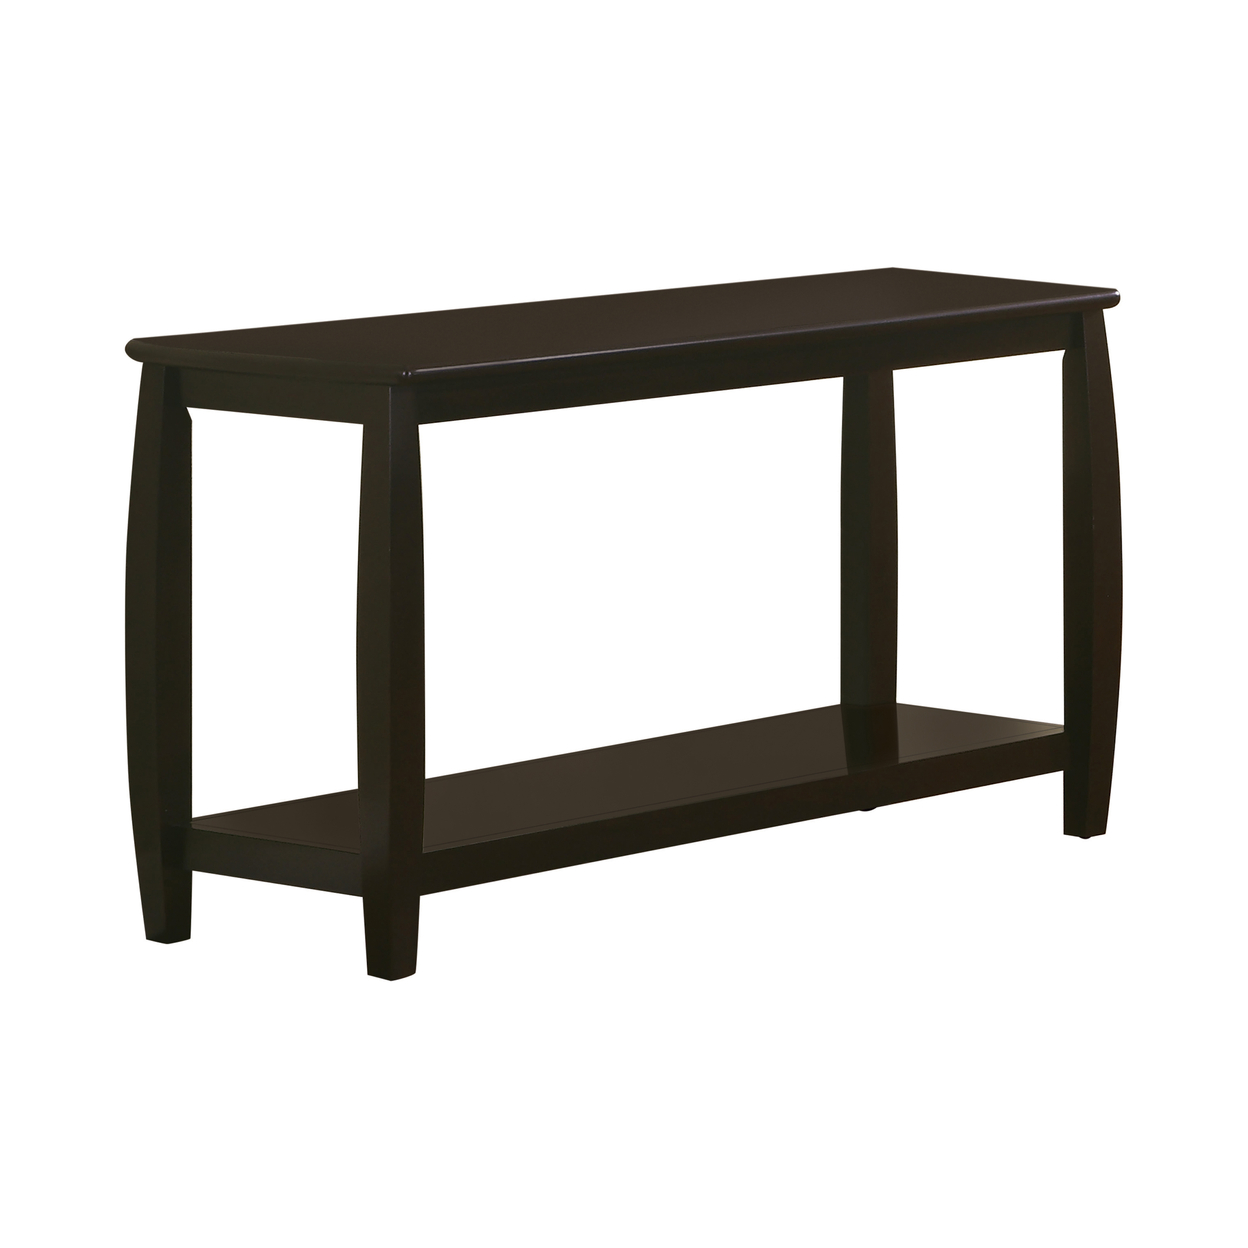 Contemporary Style Solid Wood Sofa Table With Slightly Rounded Shape, Dark Brown- Saltoro Sherpi